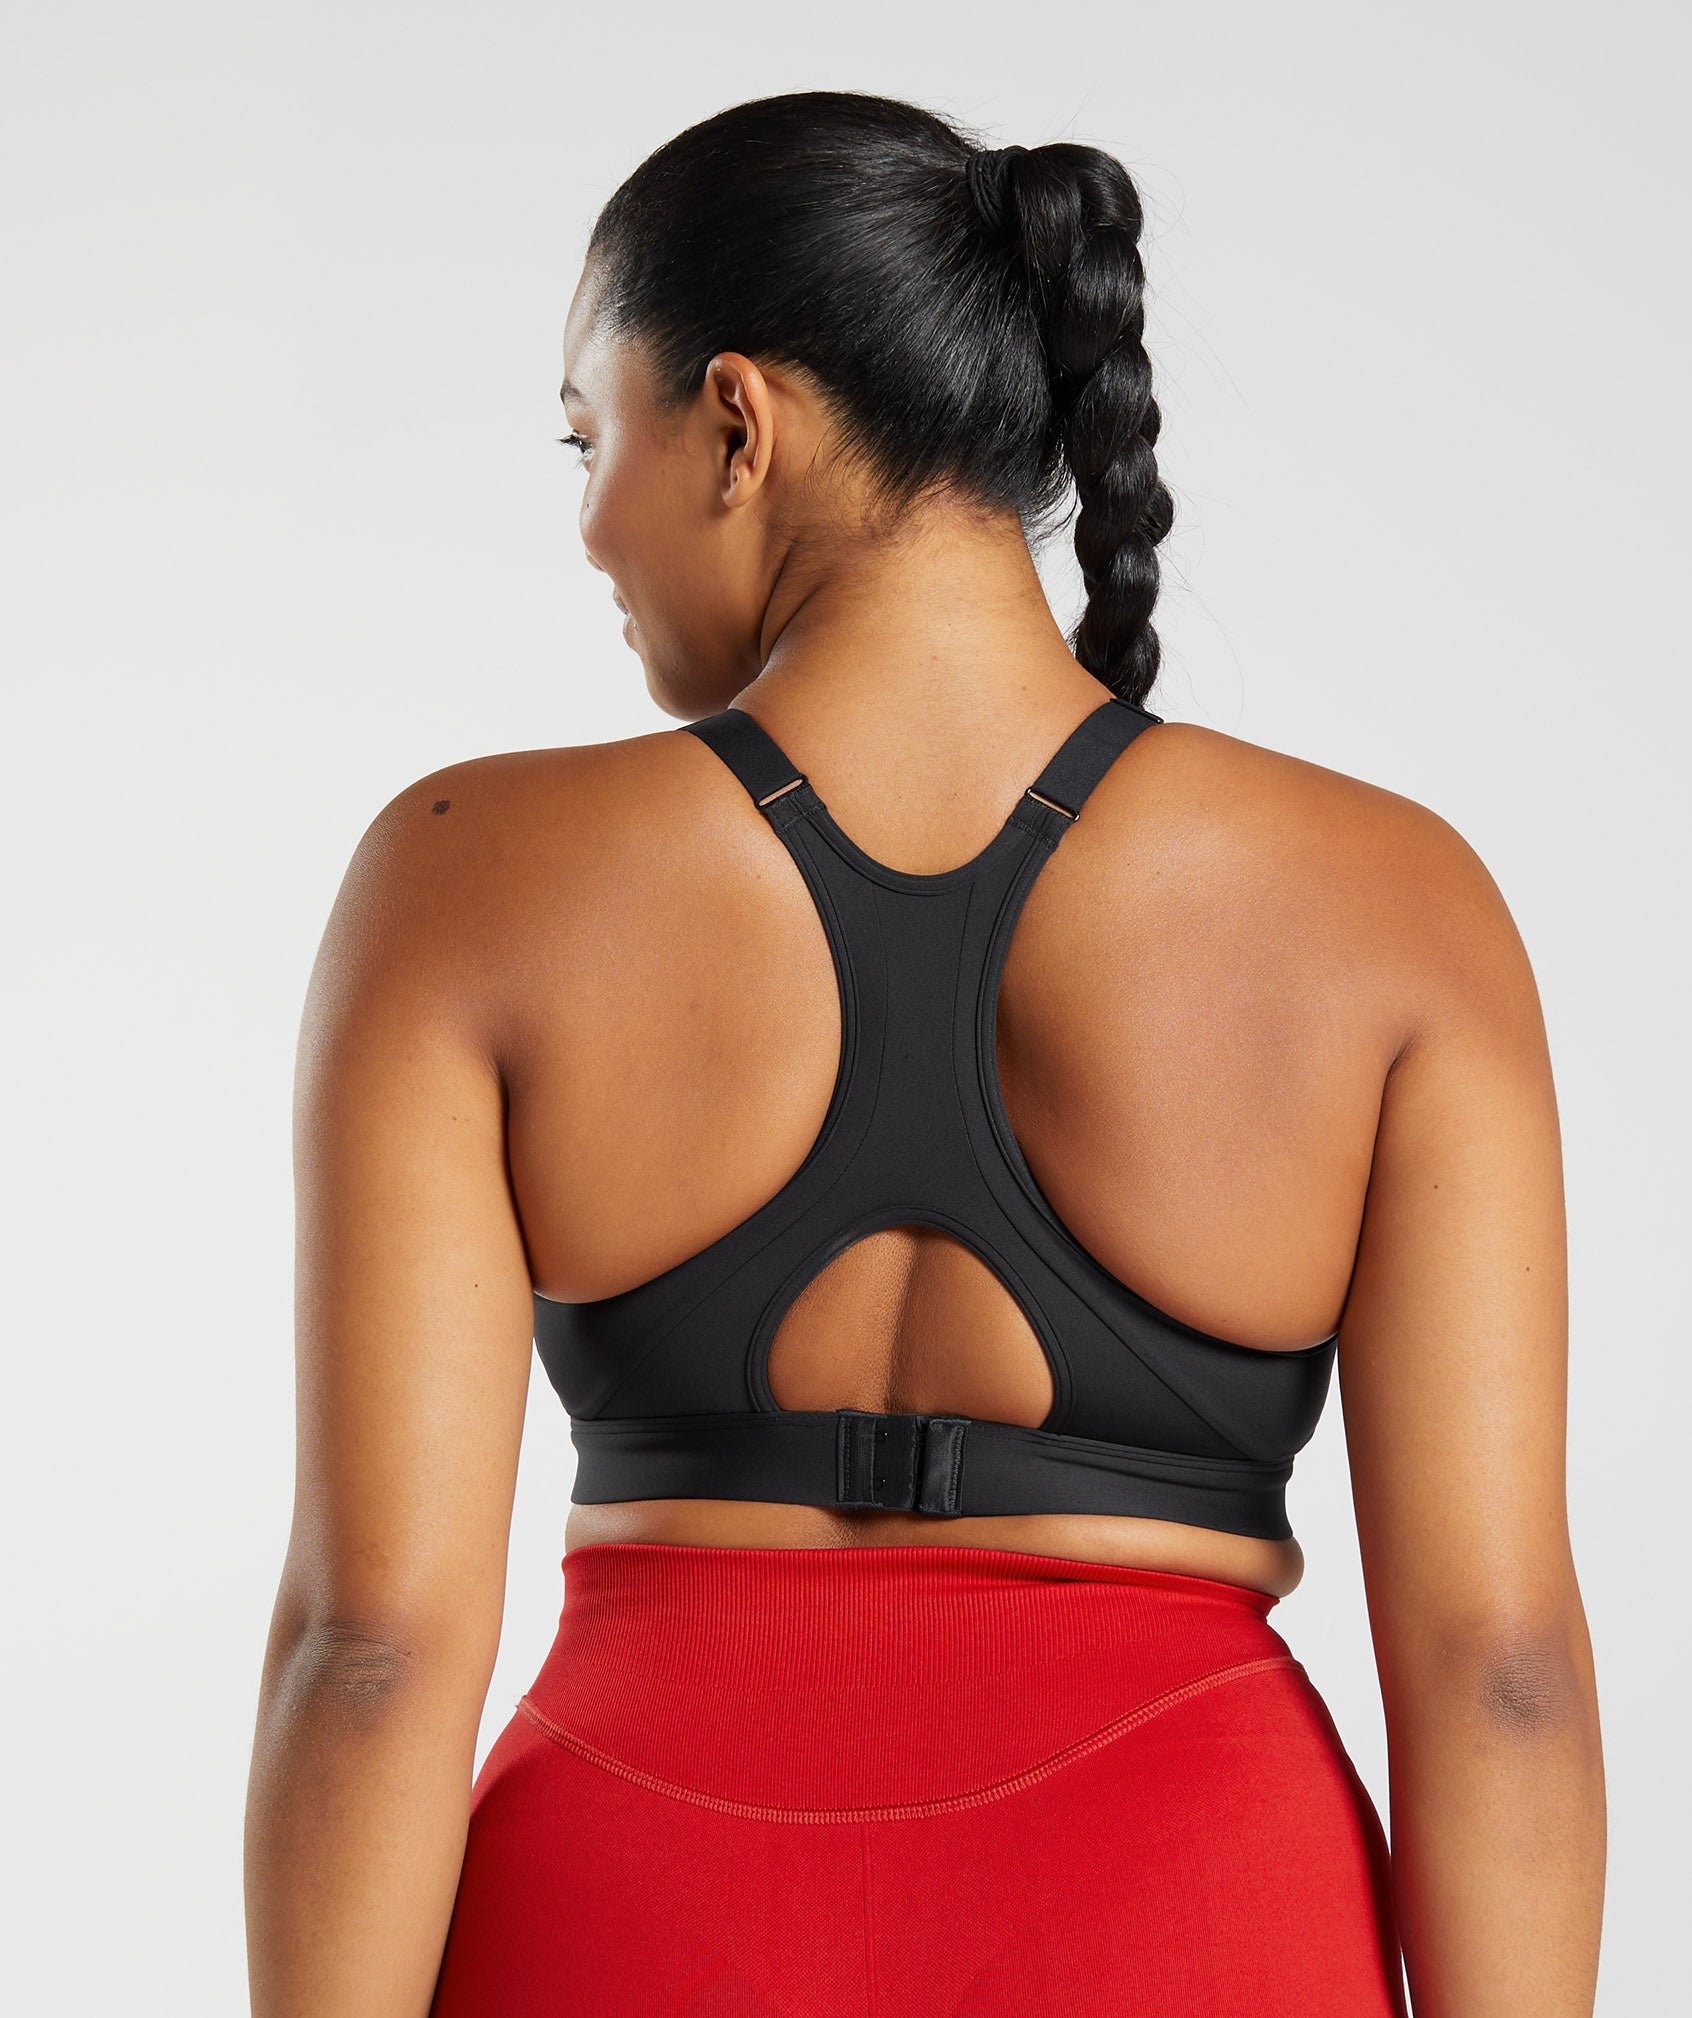 Performax Activewear: Women Sport Bra Campaign Video, High impact workouts  deserve high impact support. Give your body maximum comfort with Performax's  range of full-coverage sports bras designed with